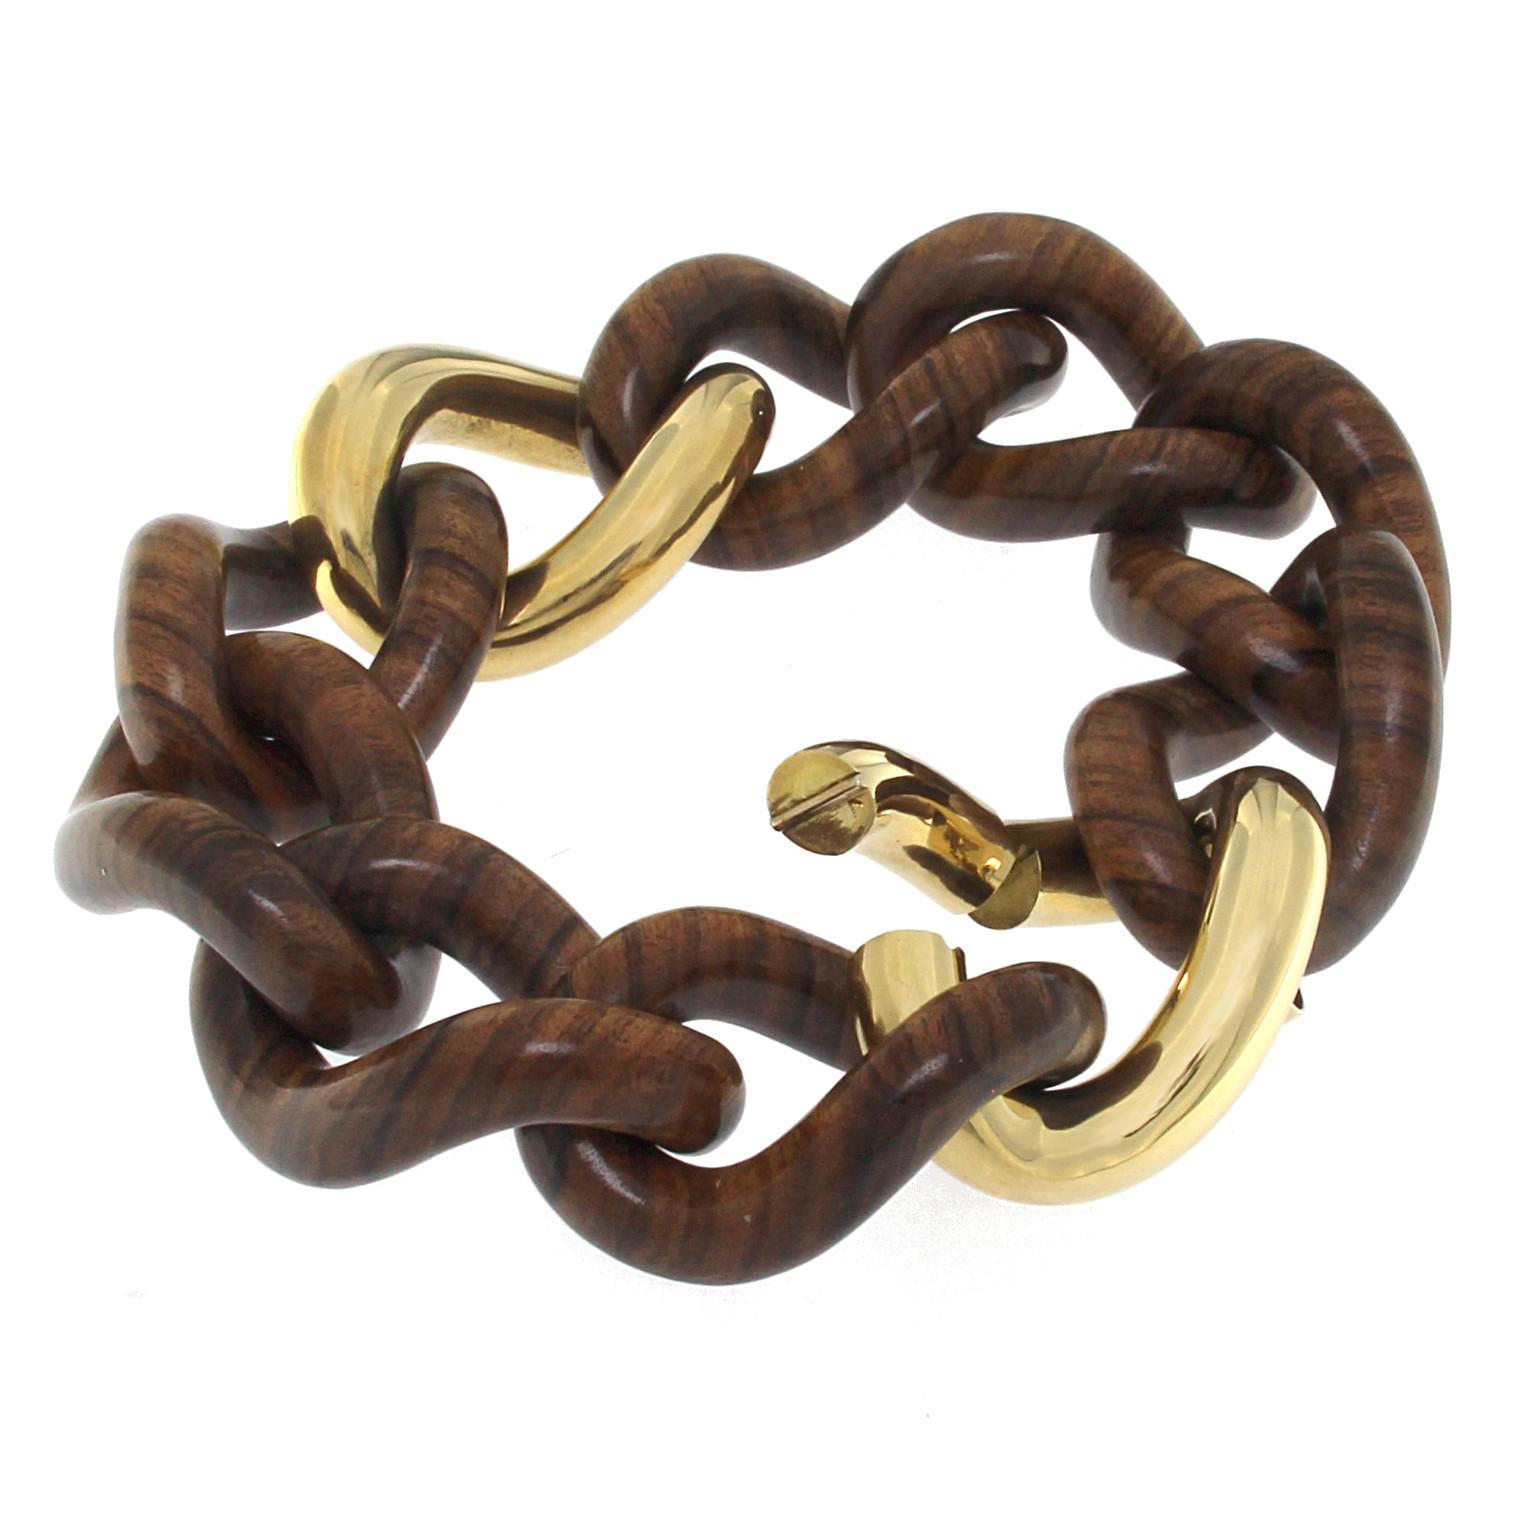 Rose wood groumette bracelet in 18 kt yellow gold 
The rose wood is the most elegant wood and even the most precious.
This iconic collection in Micheletto tradition was originally made only in gold just more or less 10 years ago it became very